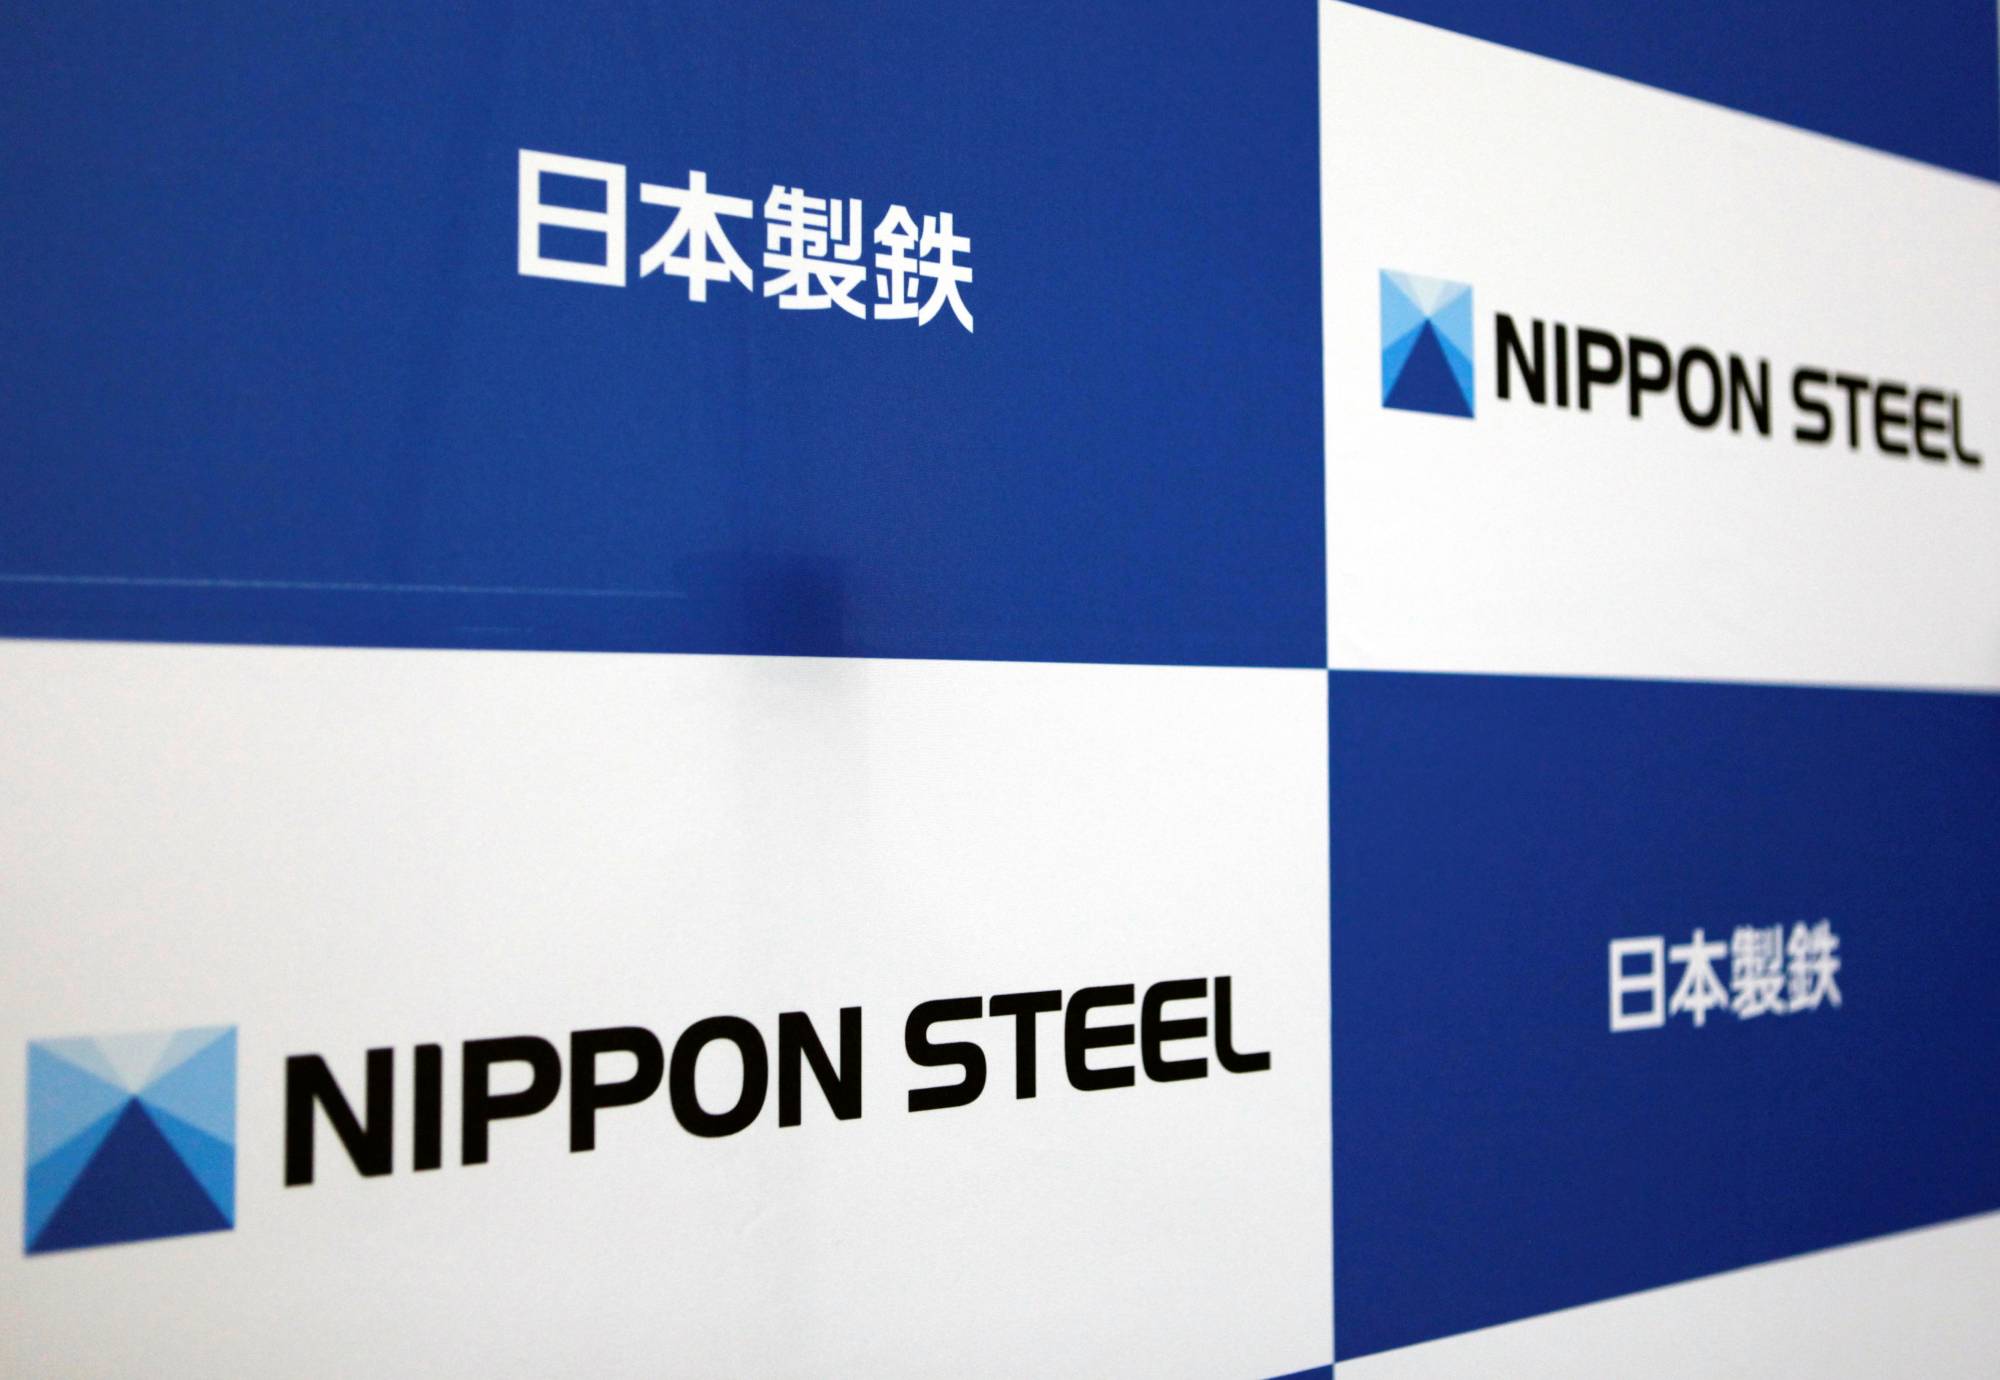 Nippon Steel recently bought the most expensive LNG cargo ever purchased by Japan, according to trading sources. | REUTERS